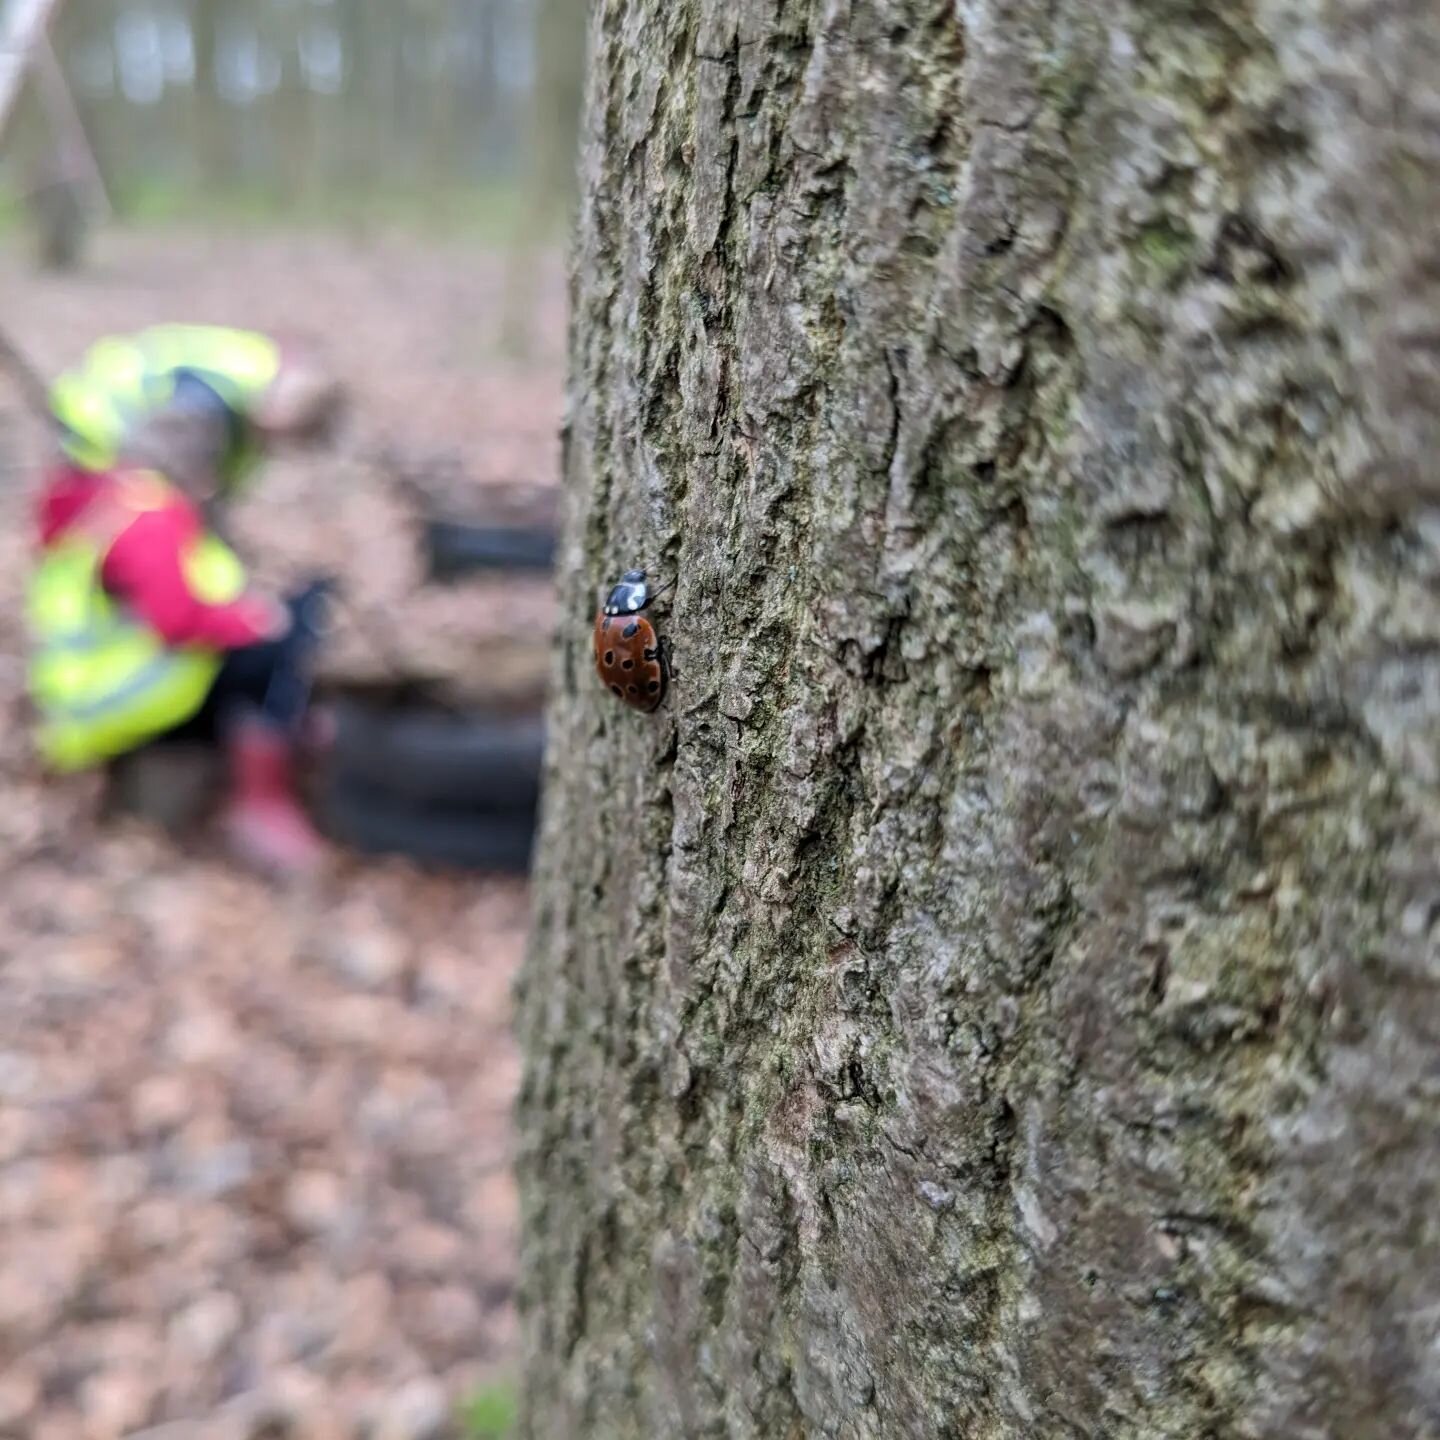 Another great day at Ledston.
Lots of exploring and inquisitiveness. Big worms were found, we looked in holes, tried to follow a mole and spotted this ladybird climbing a tree.

#outdoors #learning #outdoorlearning #primaryeducation #schooltrip #outd